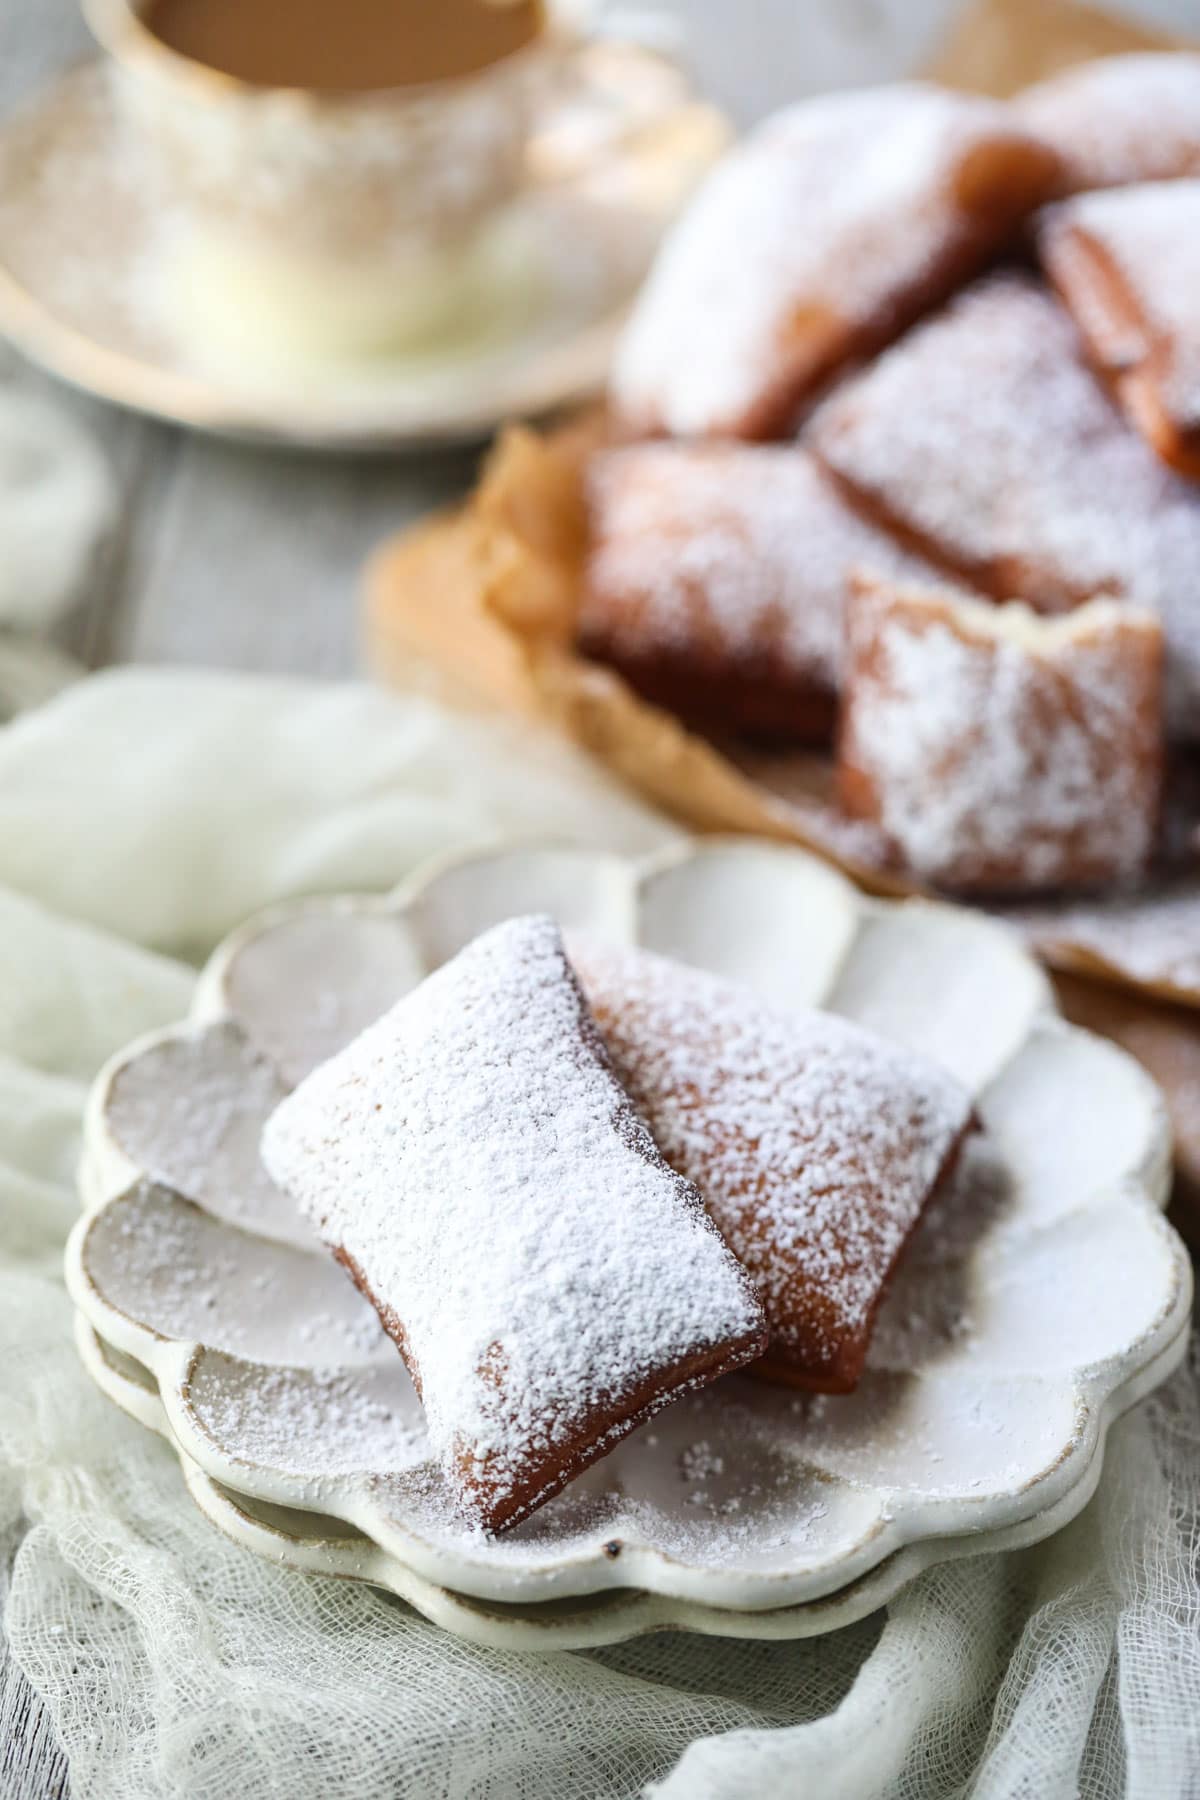 beignets on a white plate with a cup of coffee in the background.